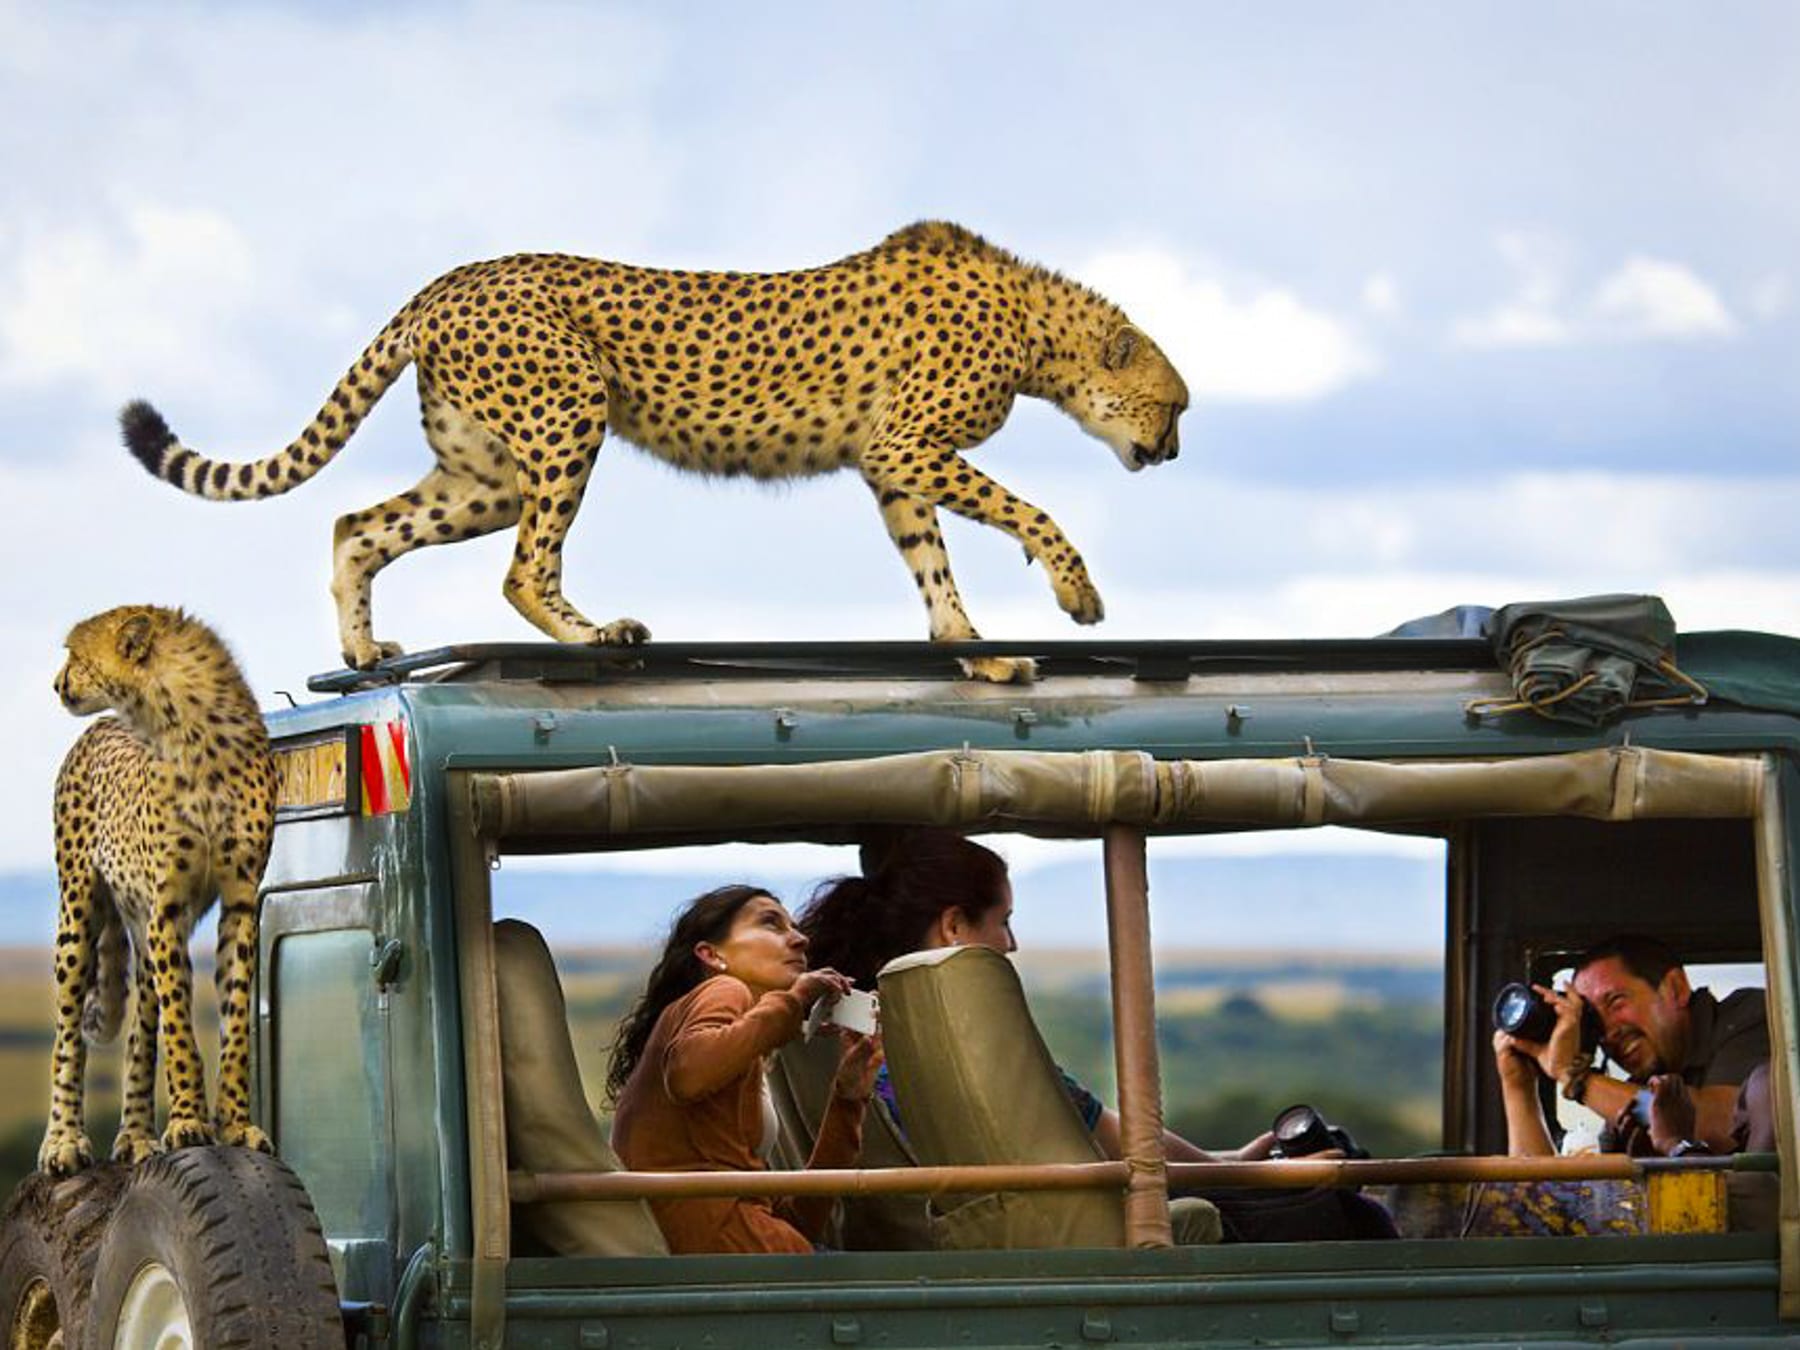 Cheetah can occasionally jump onto safari vehicles to get a good view of the surrounding landscape.